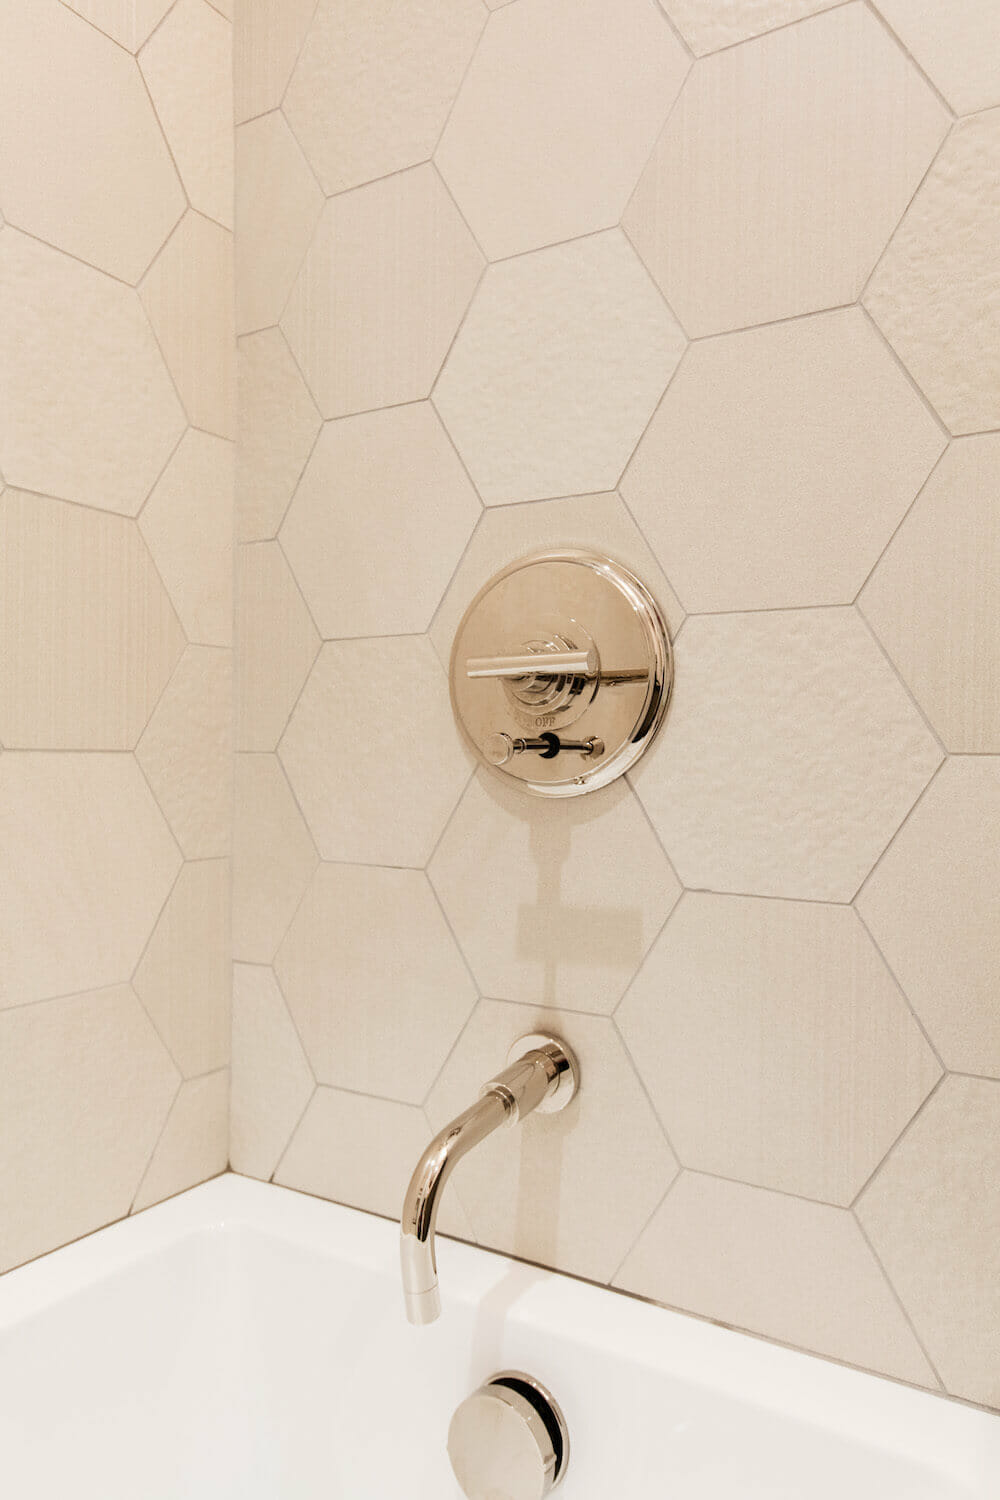 Matte gold bathroom fixtures with hexagon tiles for shower wall and white tub after renovation